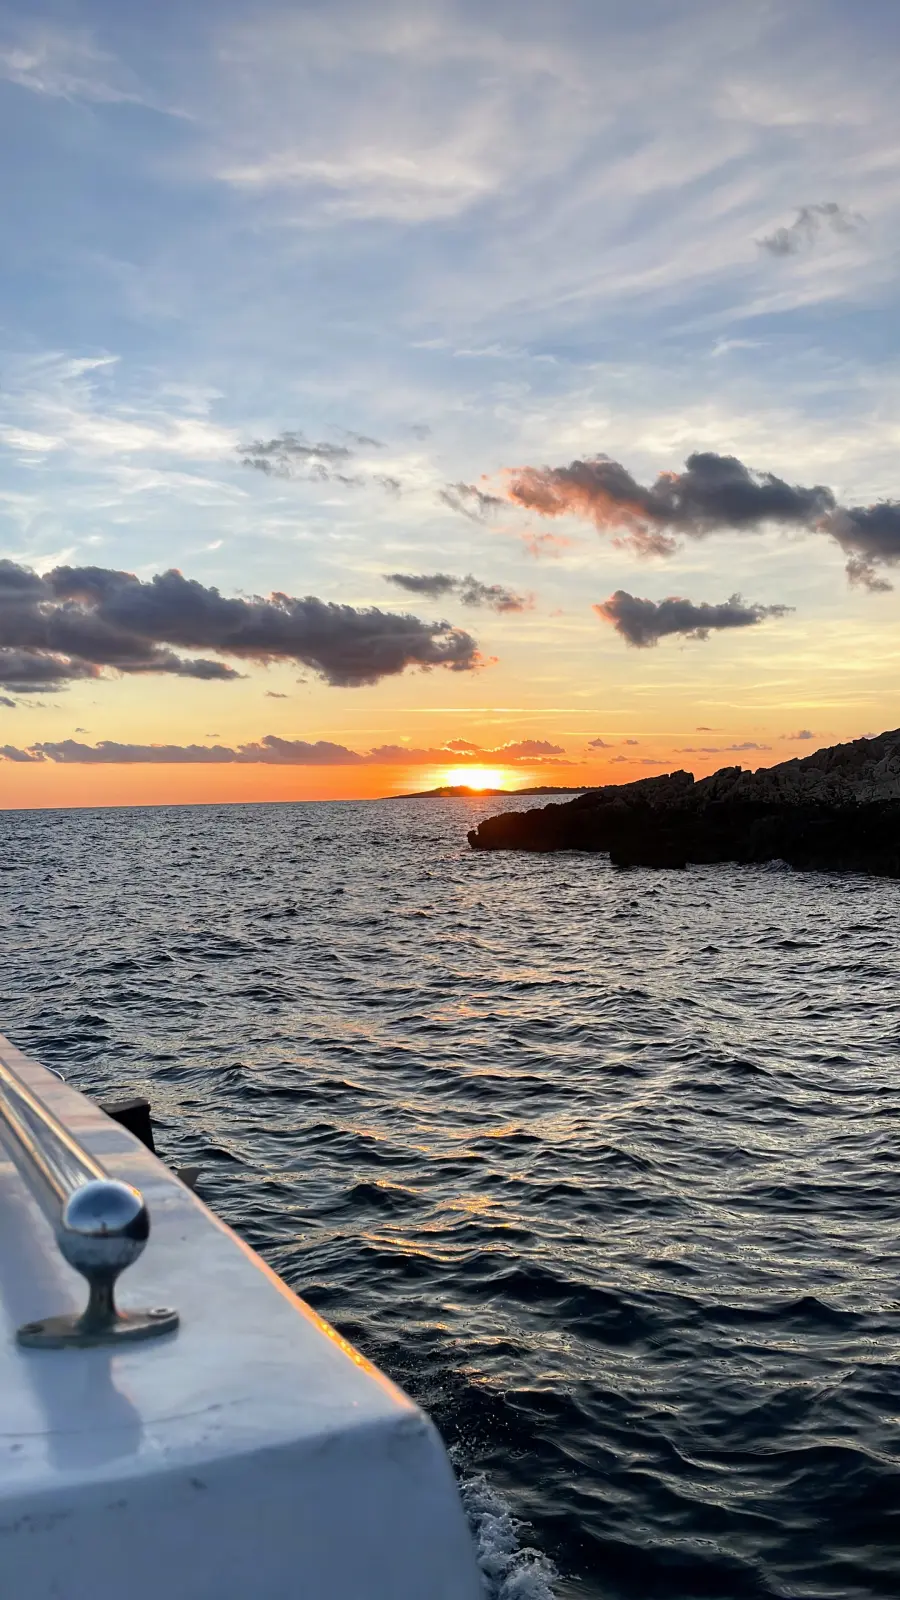 Sunset over the ocean, viewed from a small boat